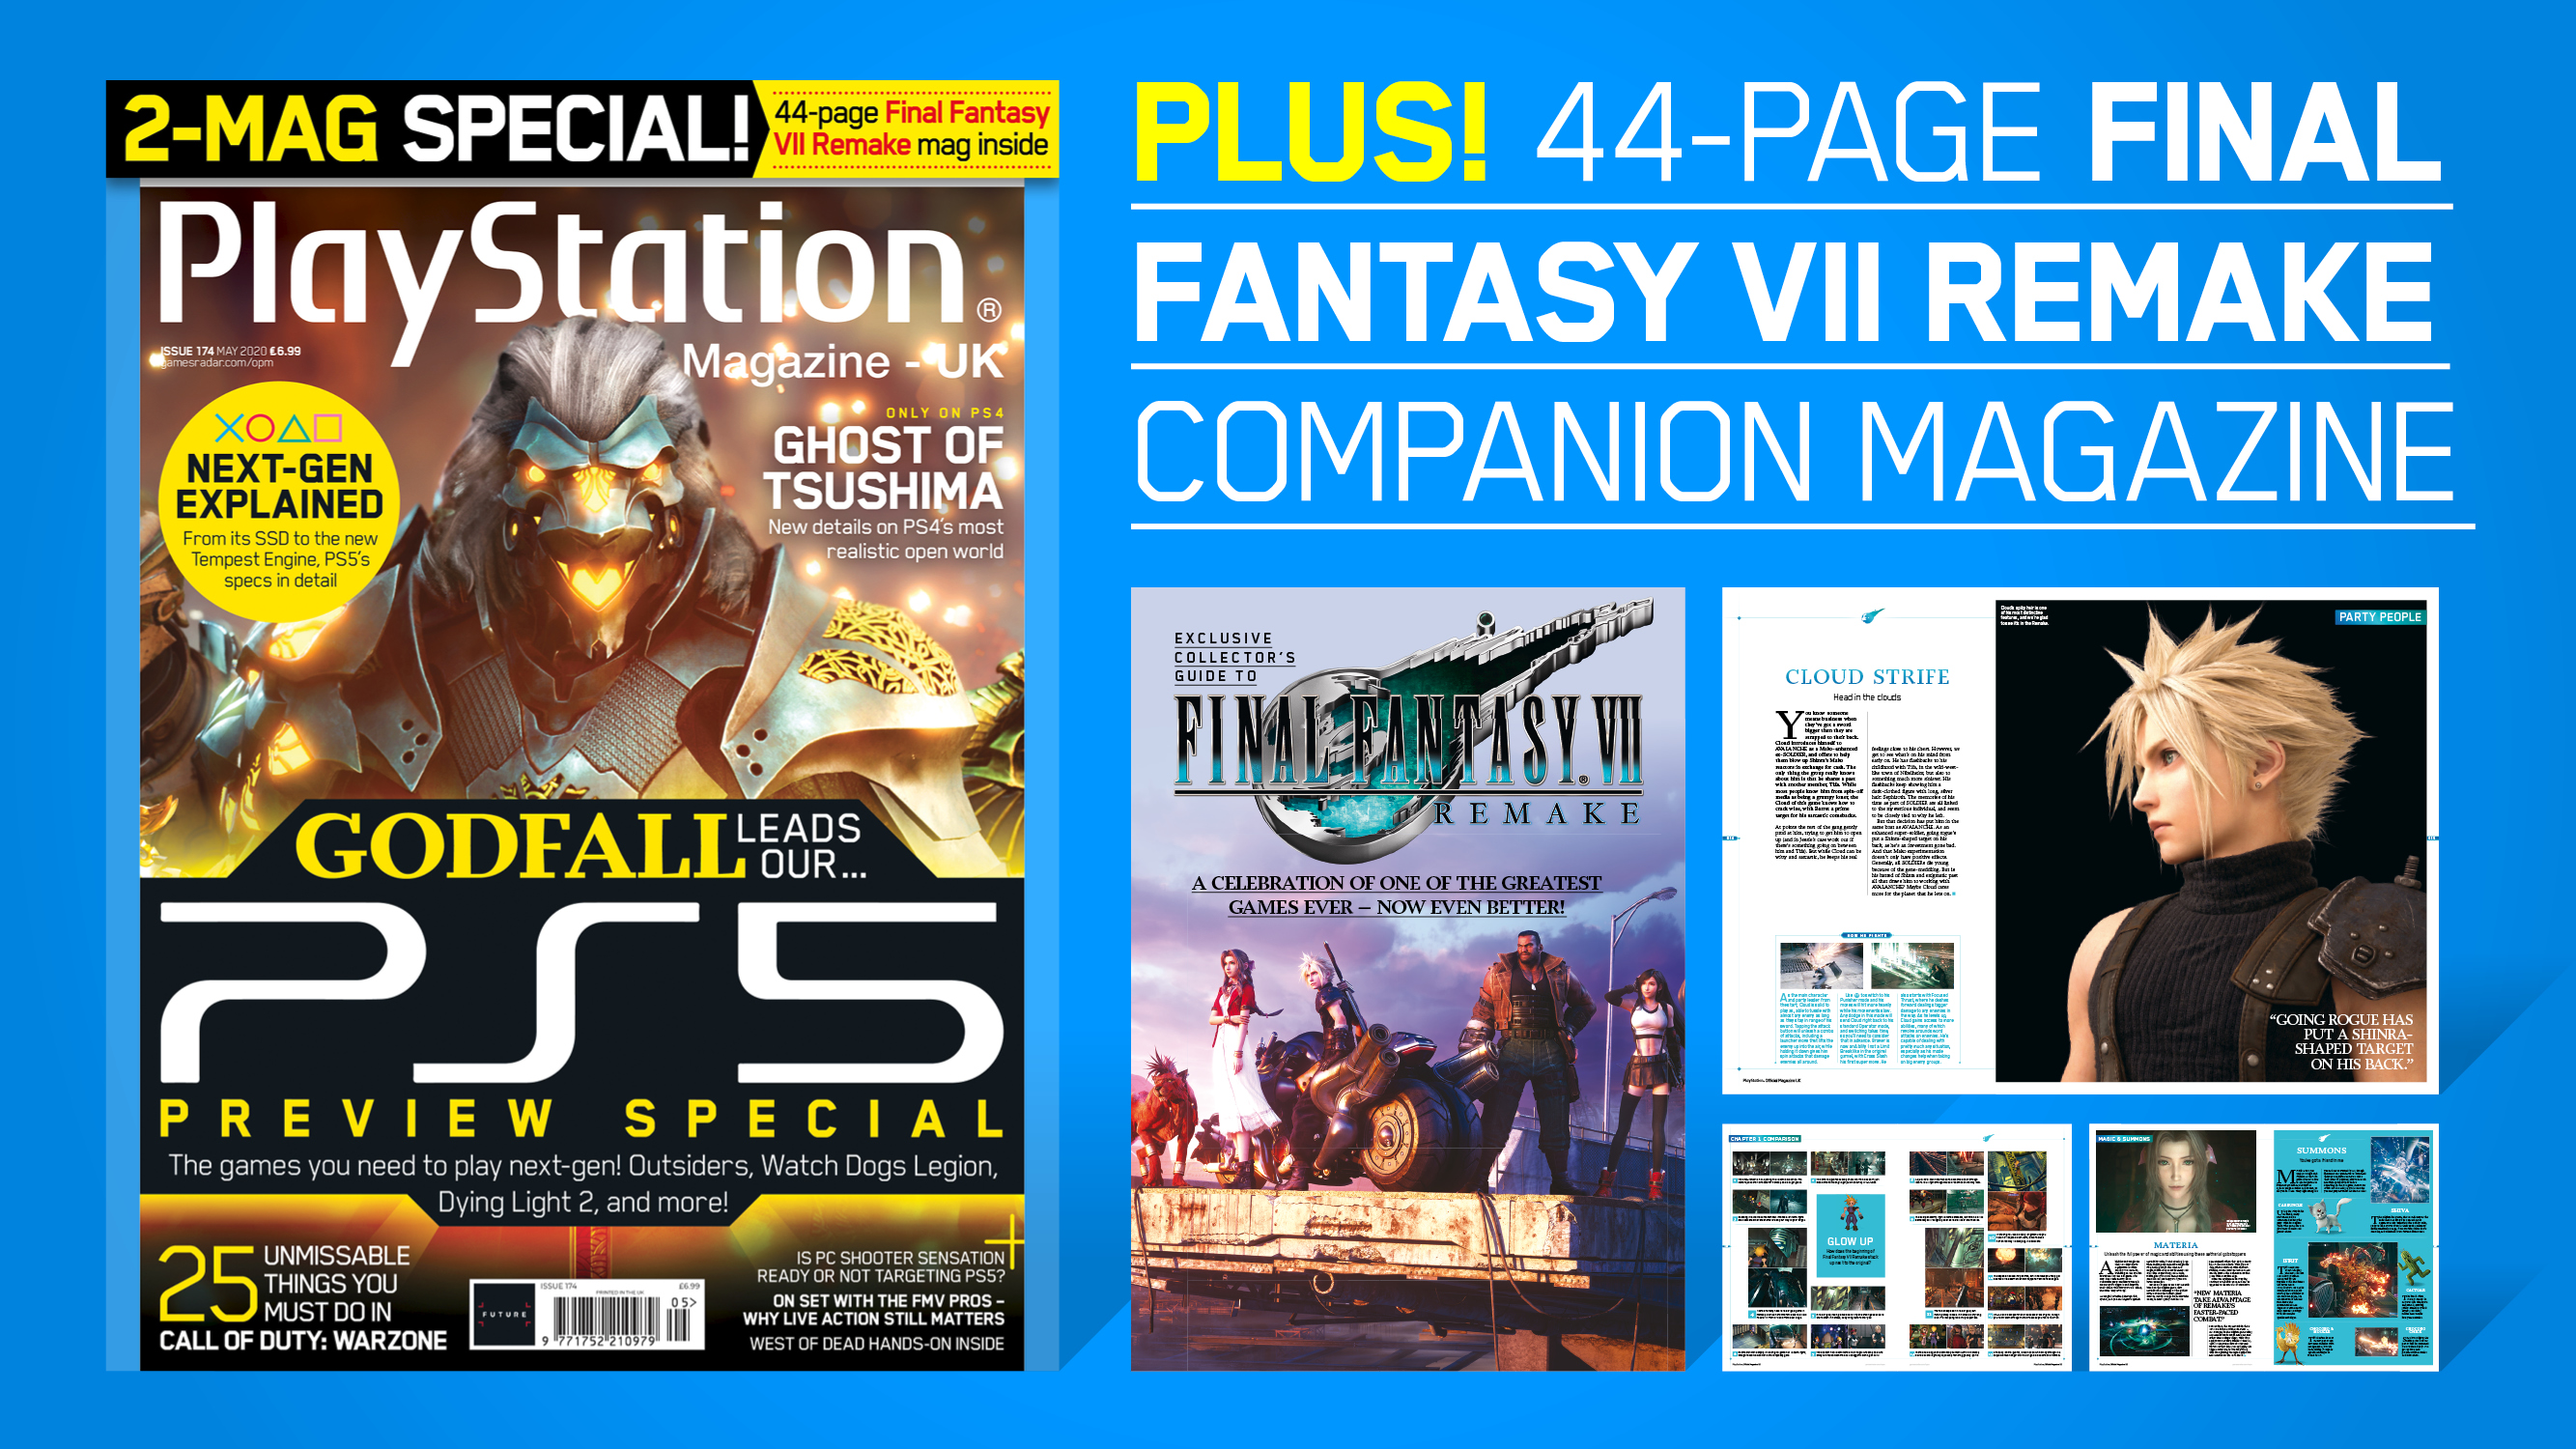 Godfall leads Official PlayStation Magazine’s PS5 preview special